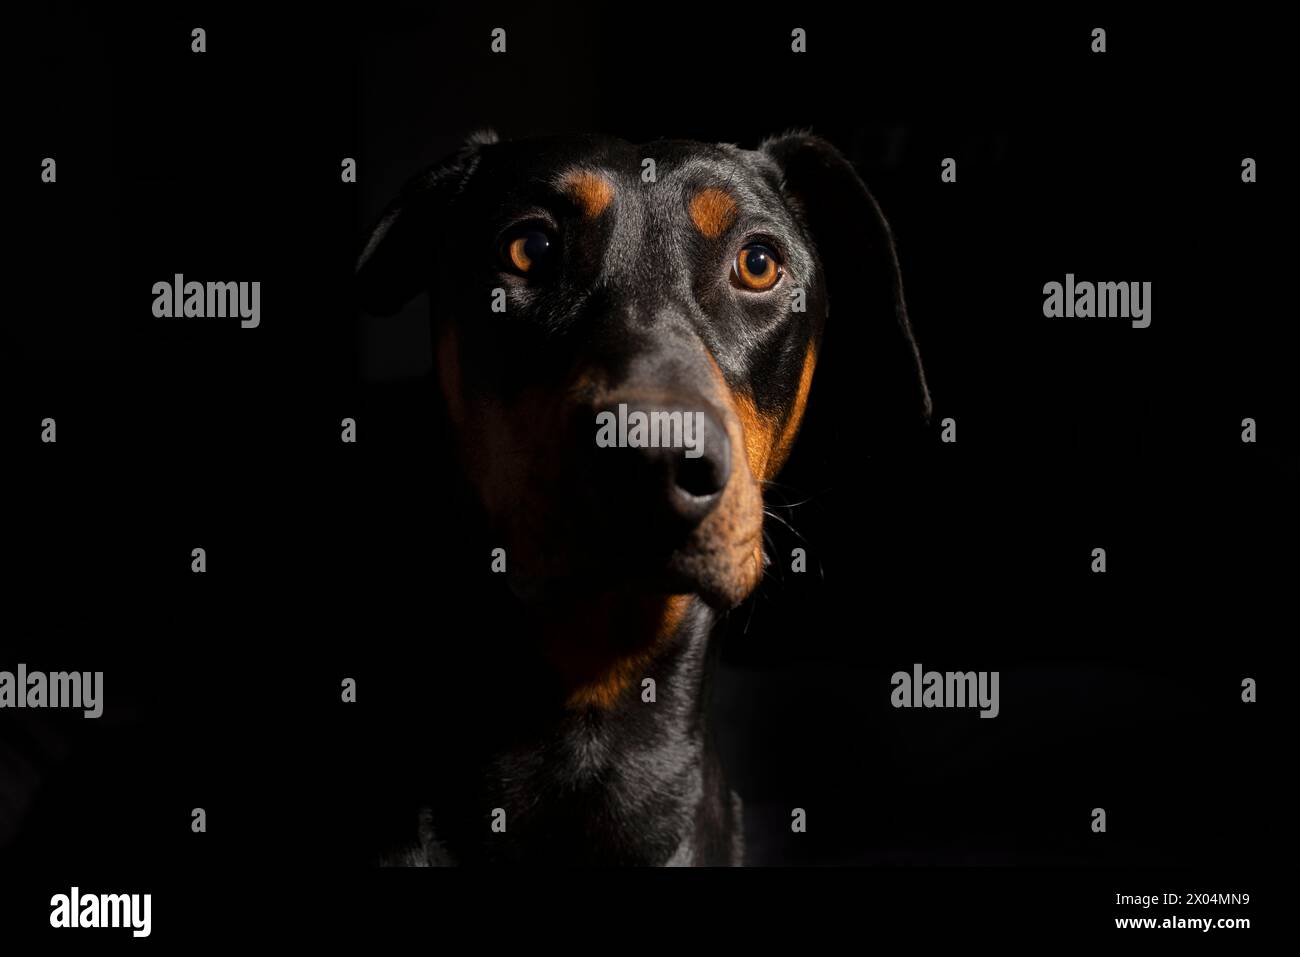 One year old black and red Doberman Pinscher portrait on a black background Stock Photo